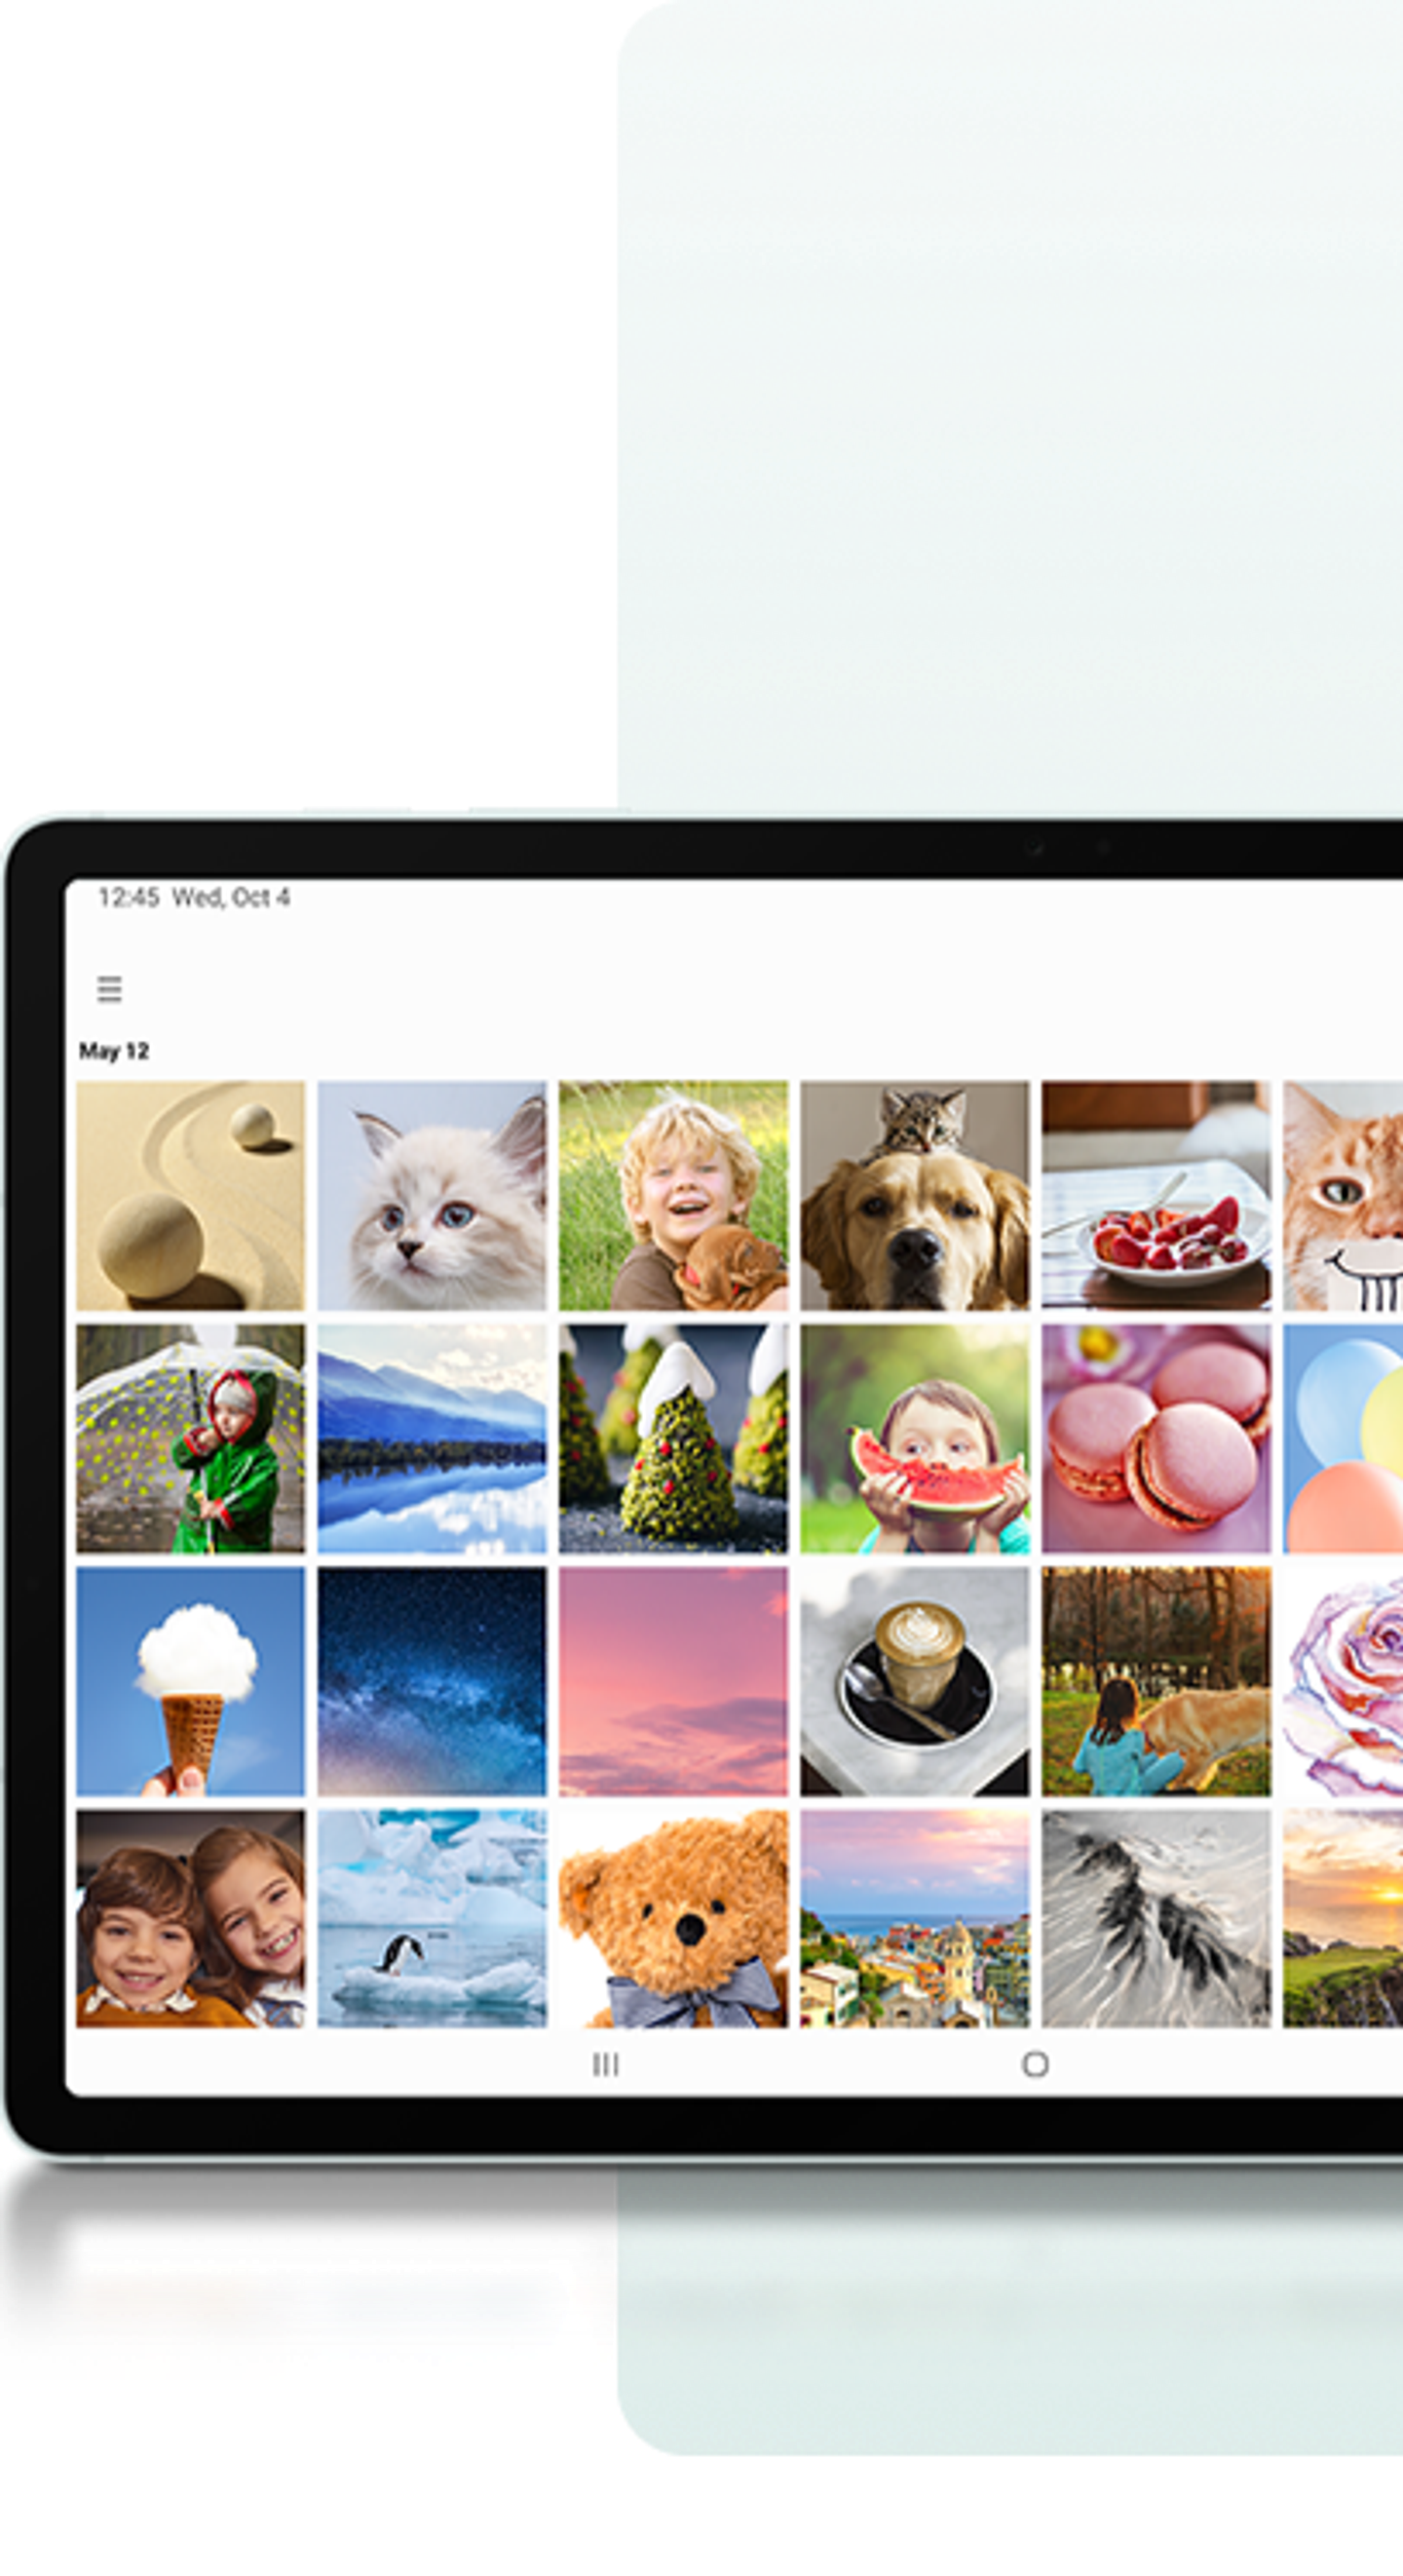 Photo of the Galaxy tablet with gallery app open showing many pictures in a grid layout.